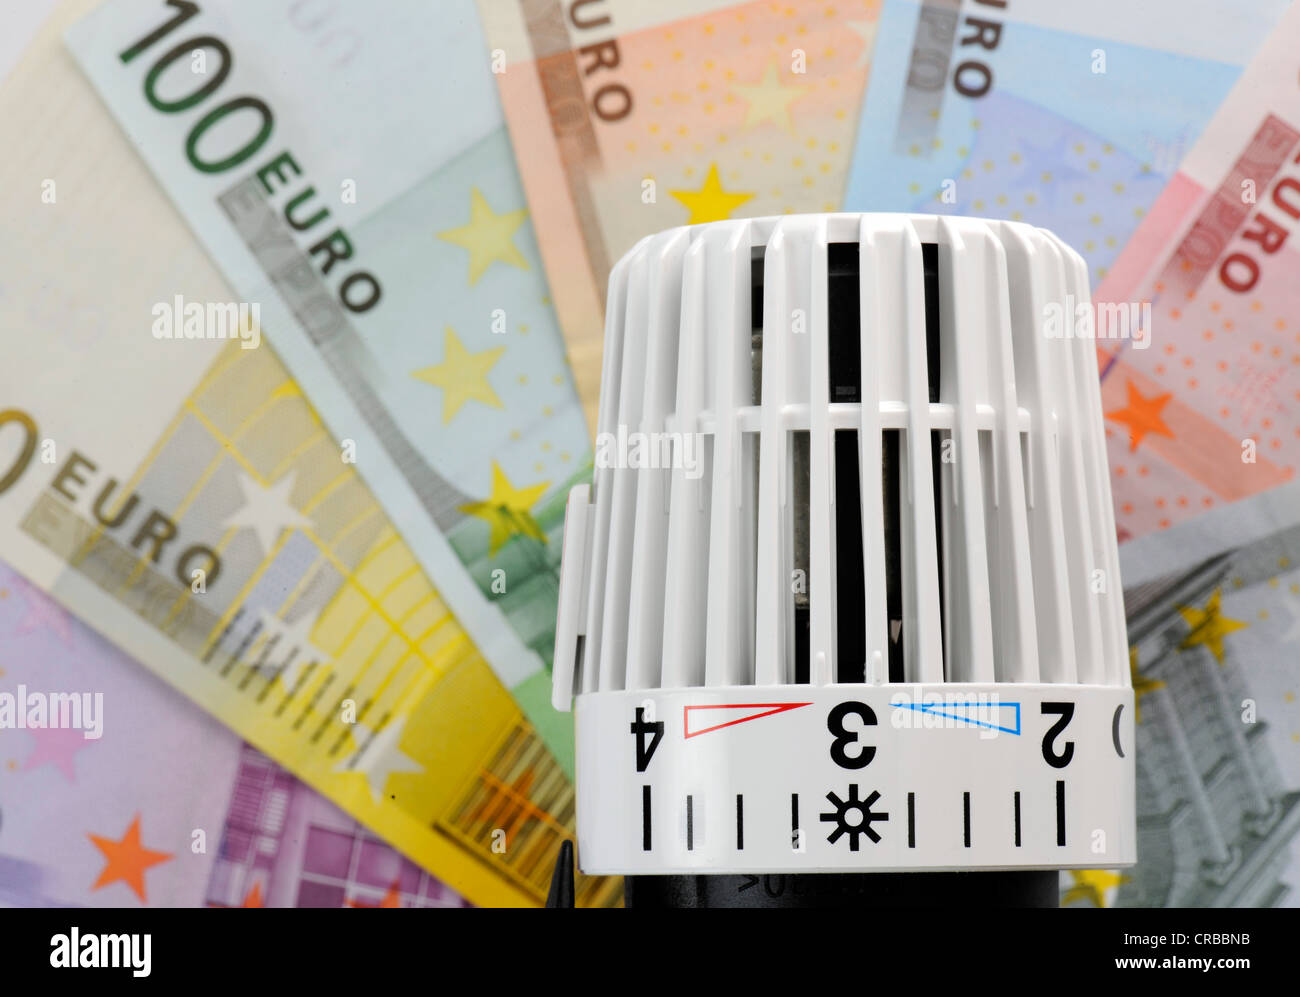 Thermostatic central heating valve, radiator valve, hot and cold marks, on euro banknotes, symbolic images for heating and Stock Photo